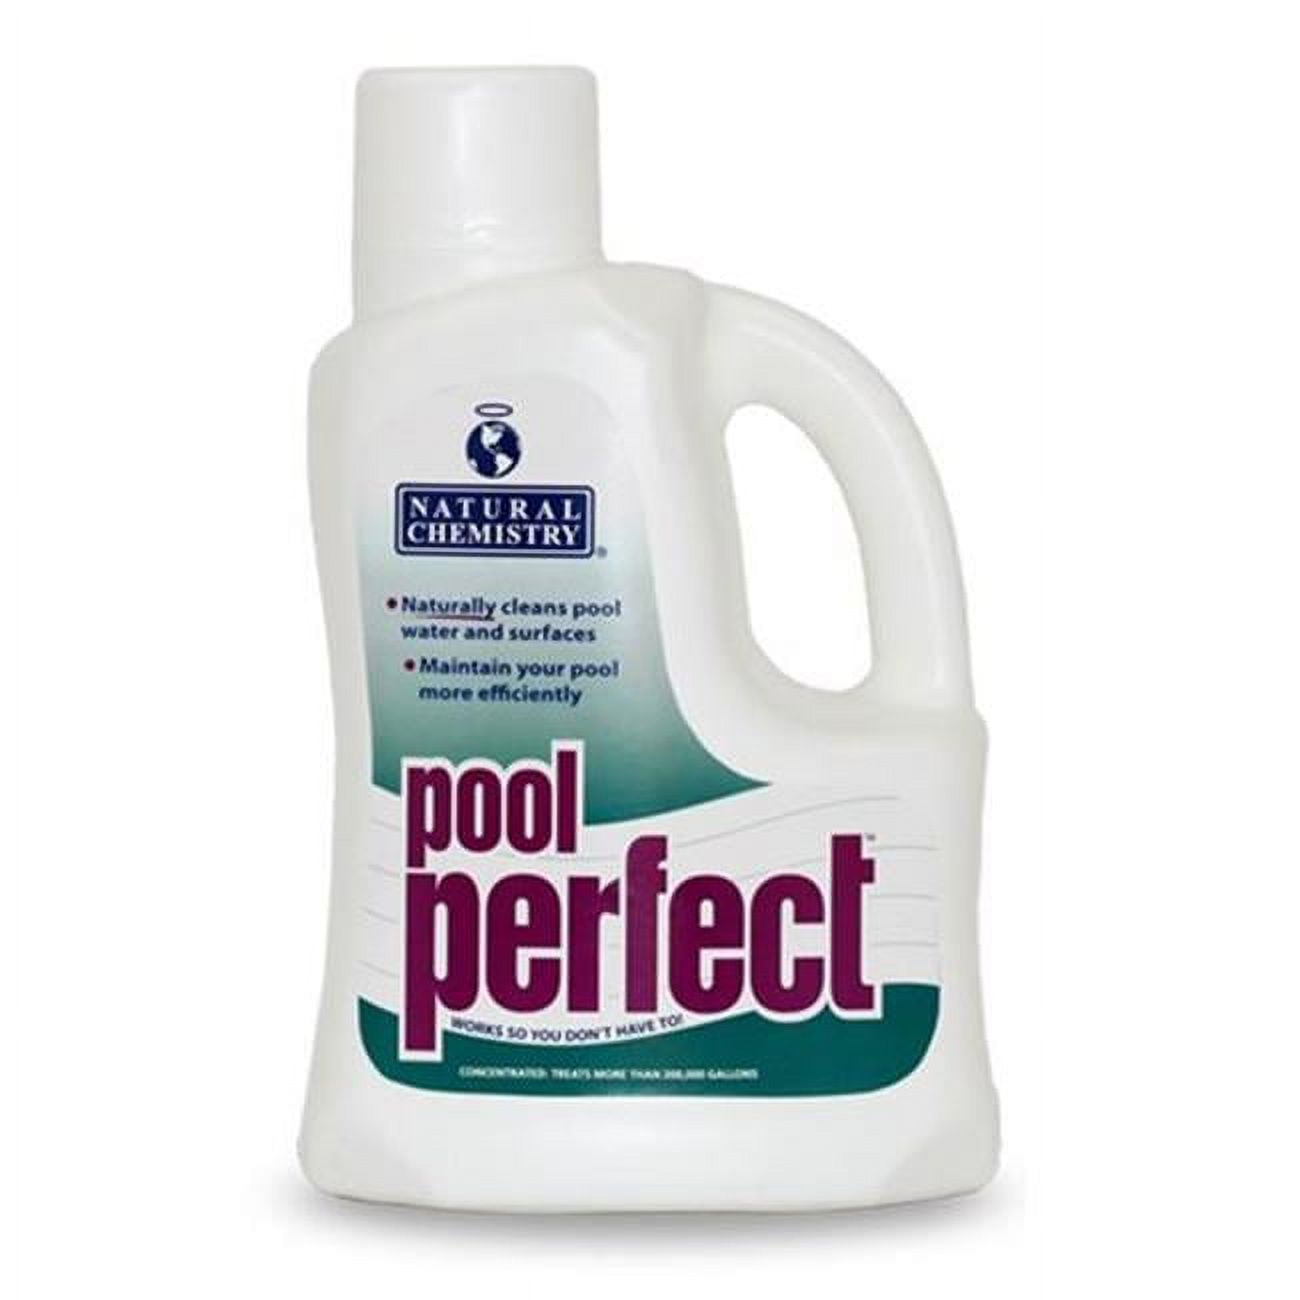 NC03121EACH 3 liter Pool Perfect Enzyme -  Natural Chemistry